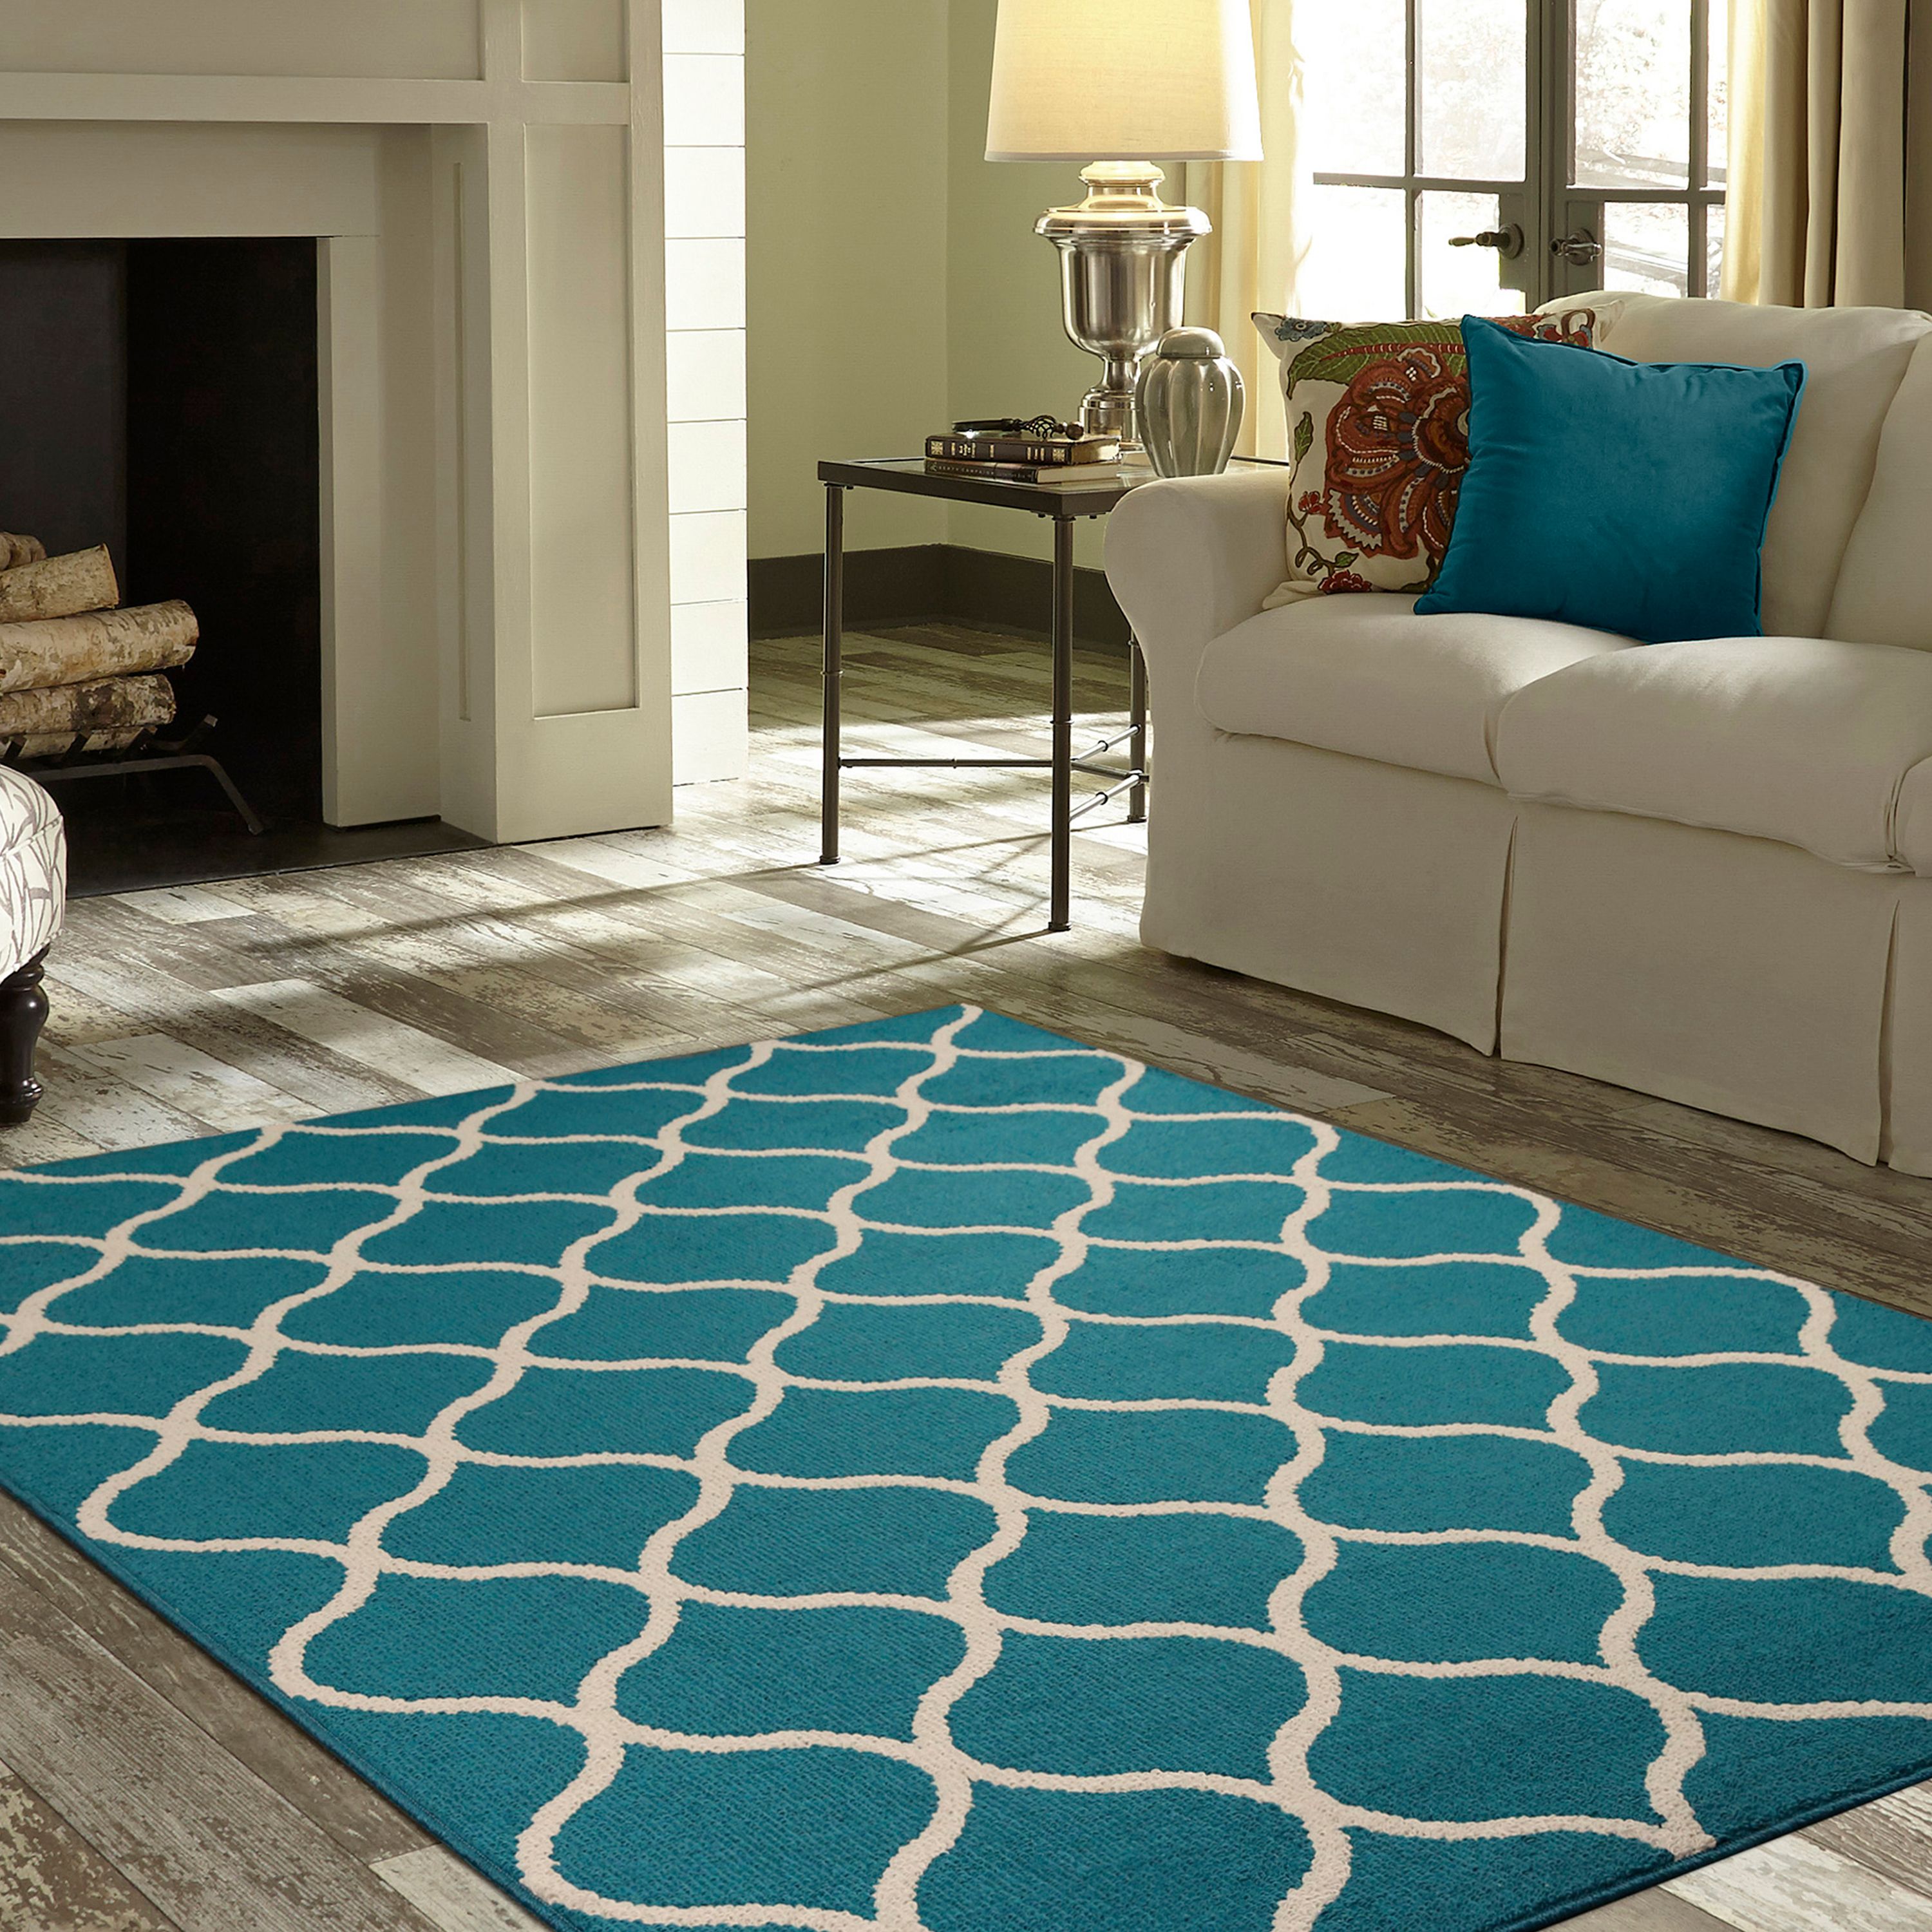 Maples Rugs Transitional Fretwork Teal Blue Living Room Indoor Area Rug, 5' x 7' - image 2 of 6